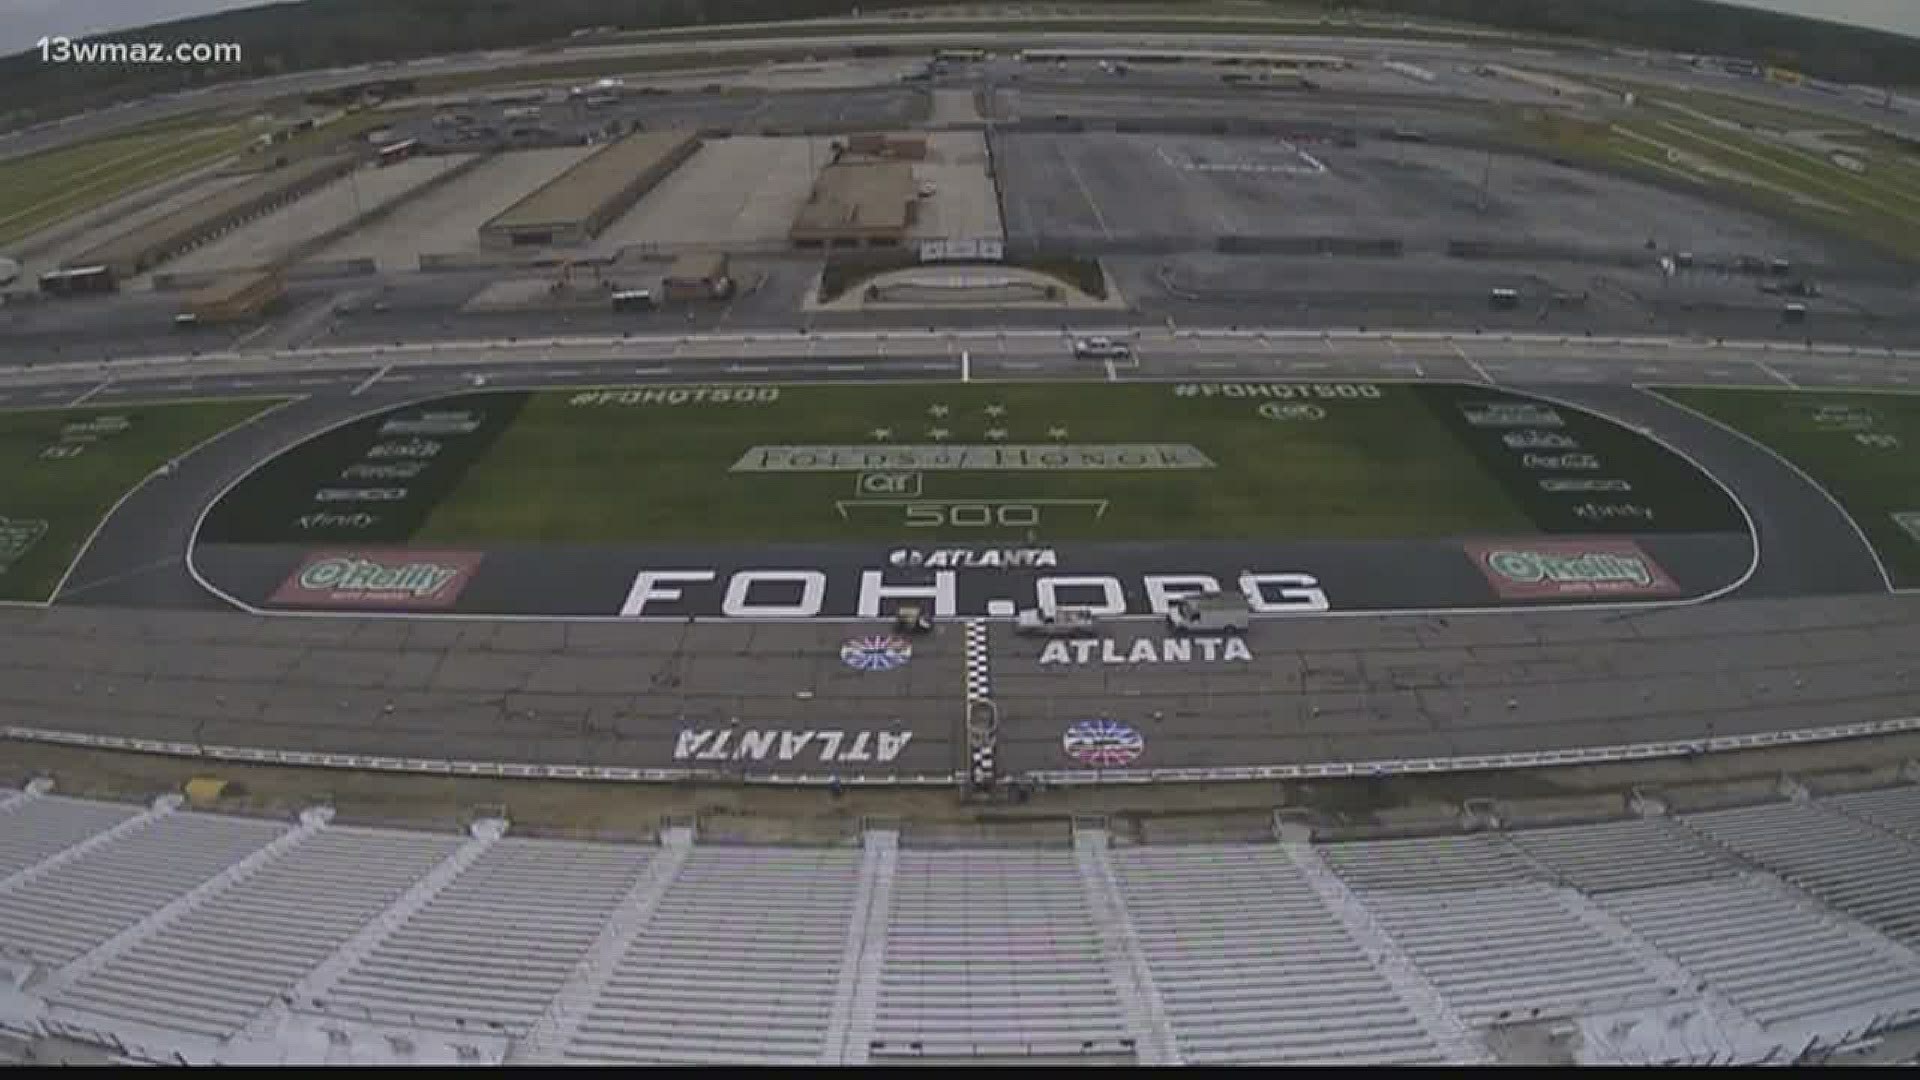 For the first time in nearly 2 months, the state of Georgia will have a chance to be entertained by professional sports with a weekend of NASCAR activities in June.